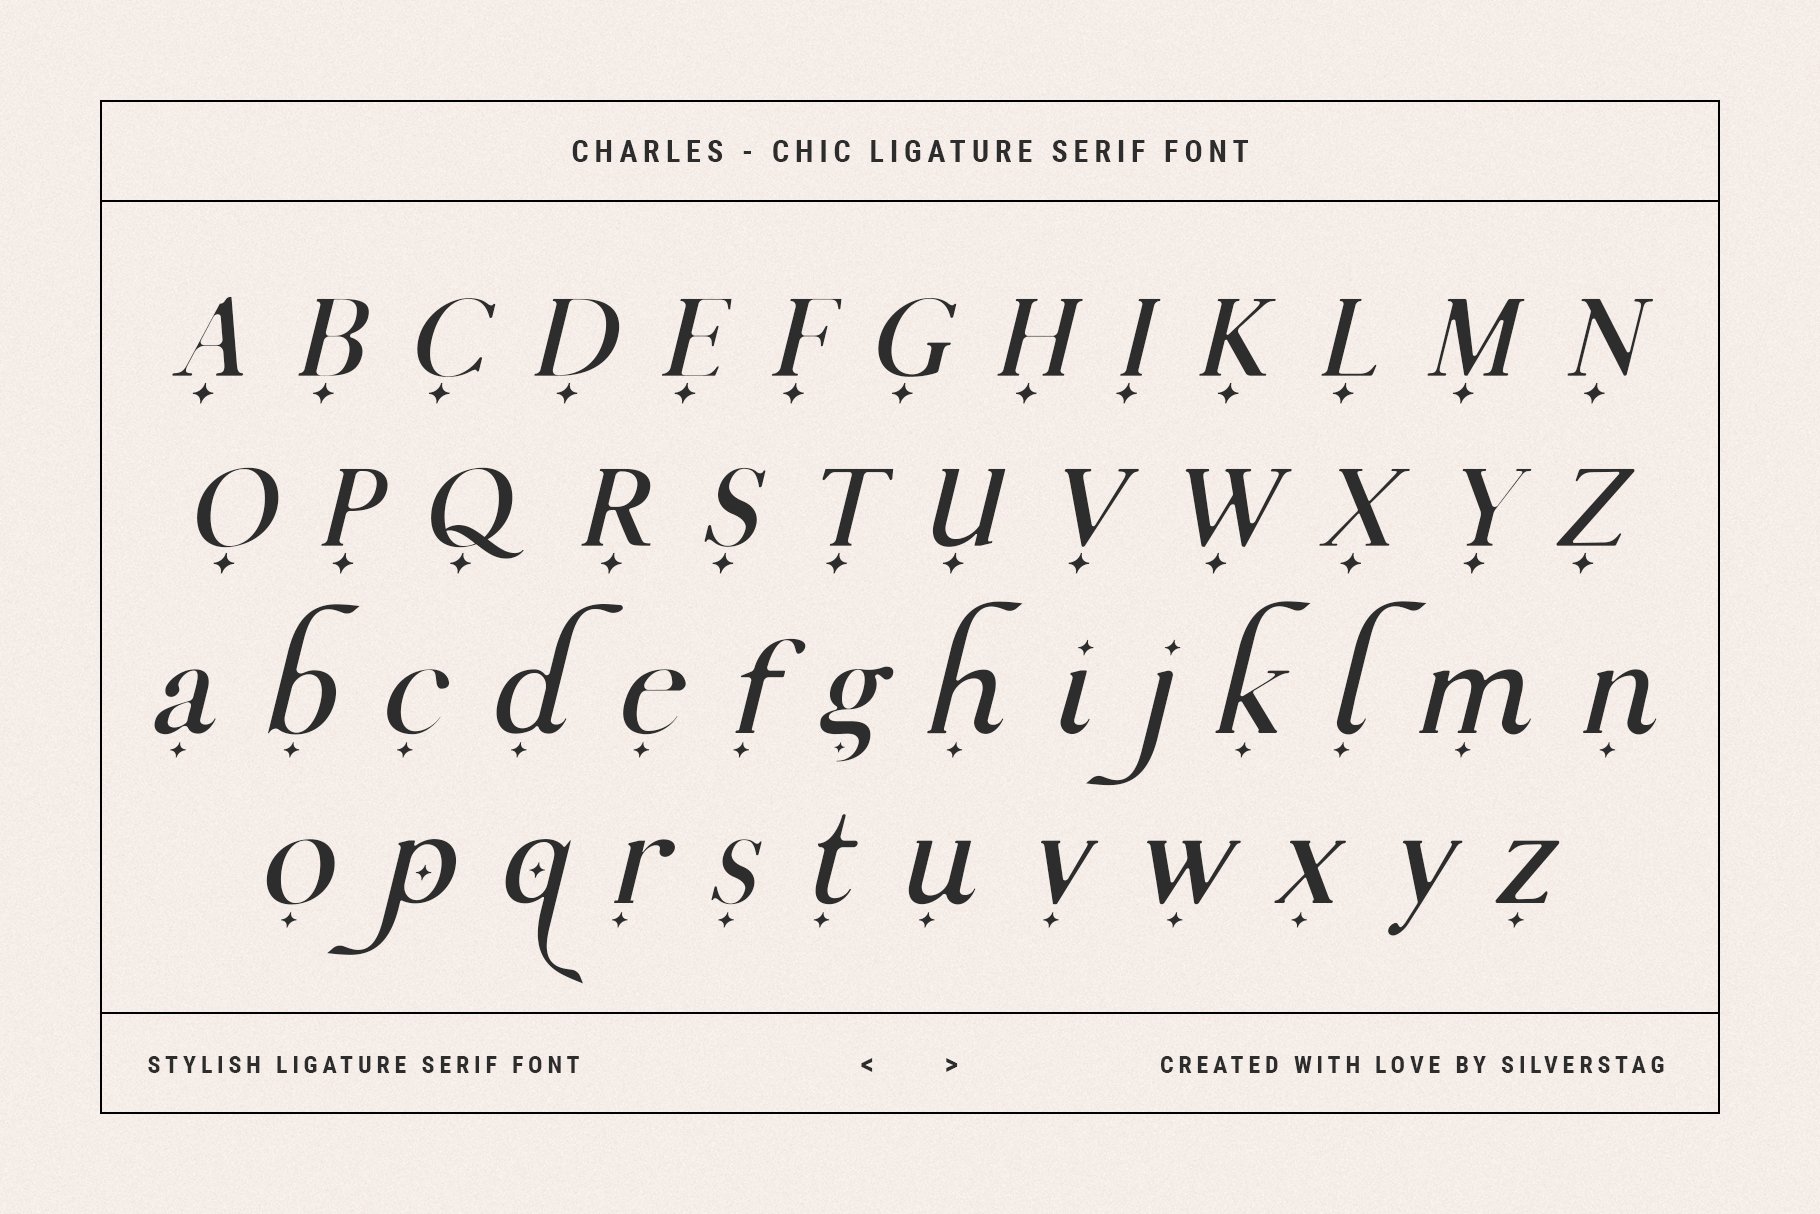 General view of the charles ligature serif font.